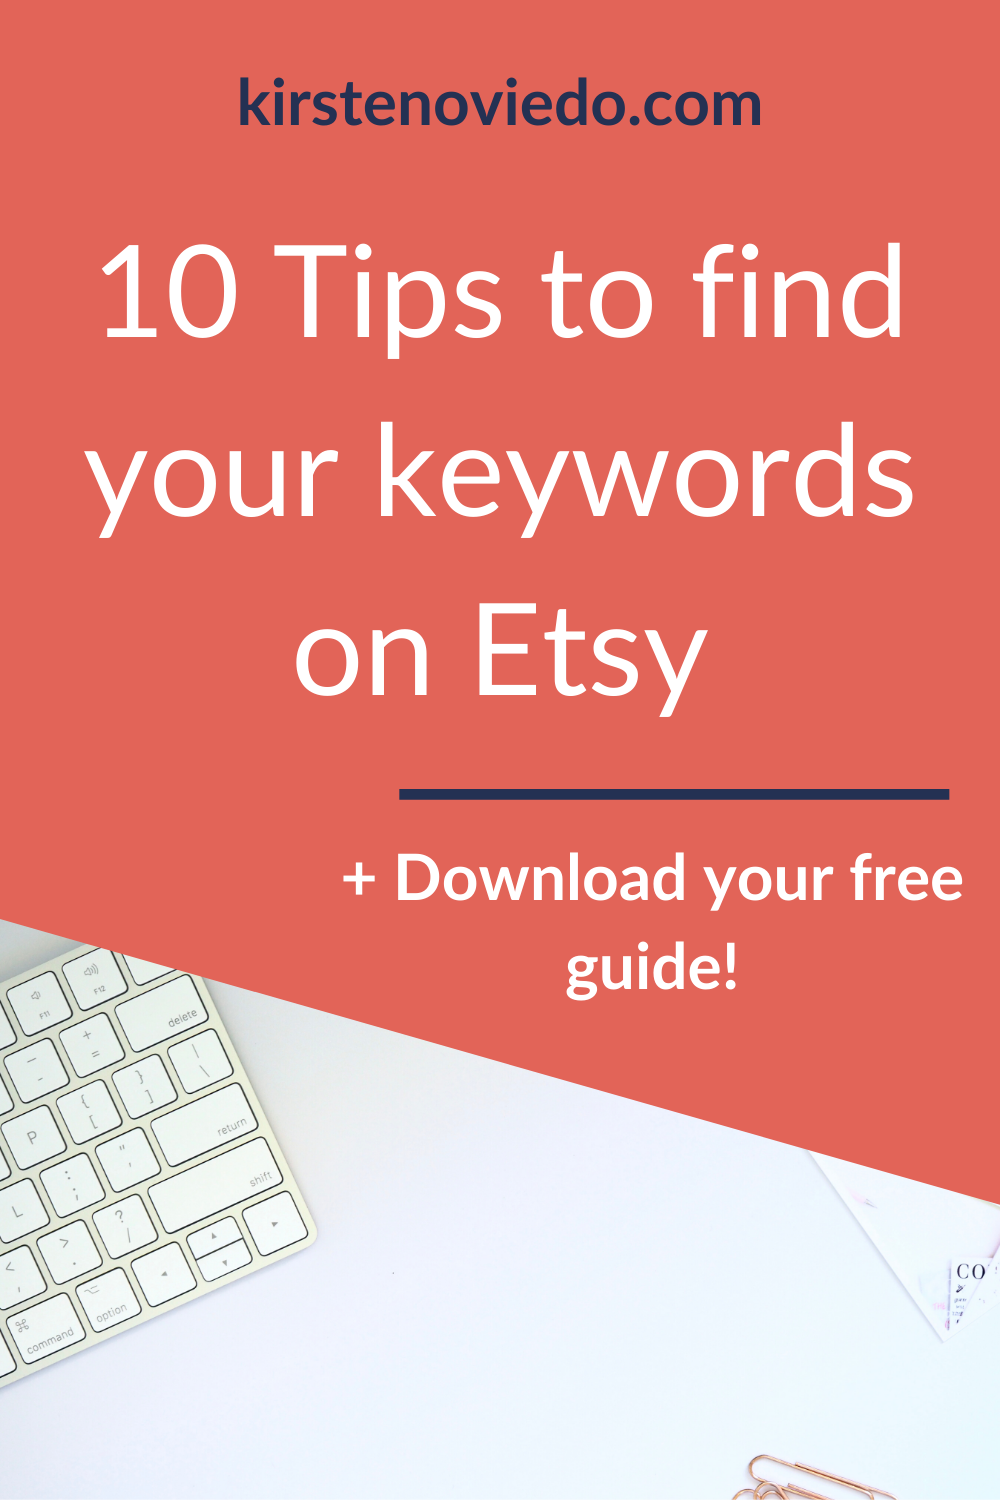 10 tips to find your keywords on Etsy - Kisten Oviedo10